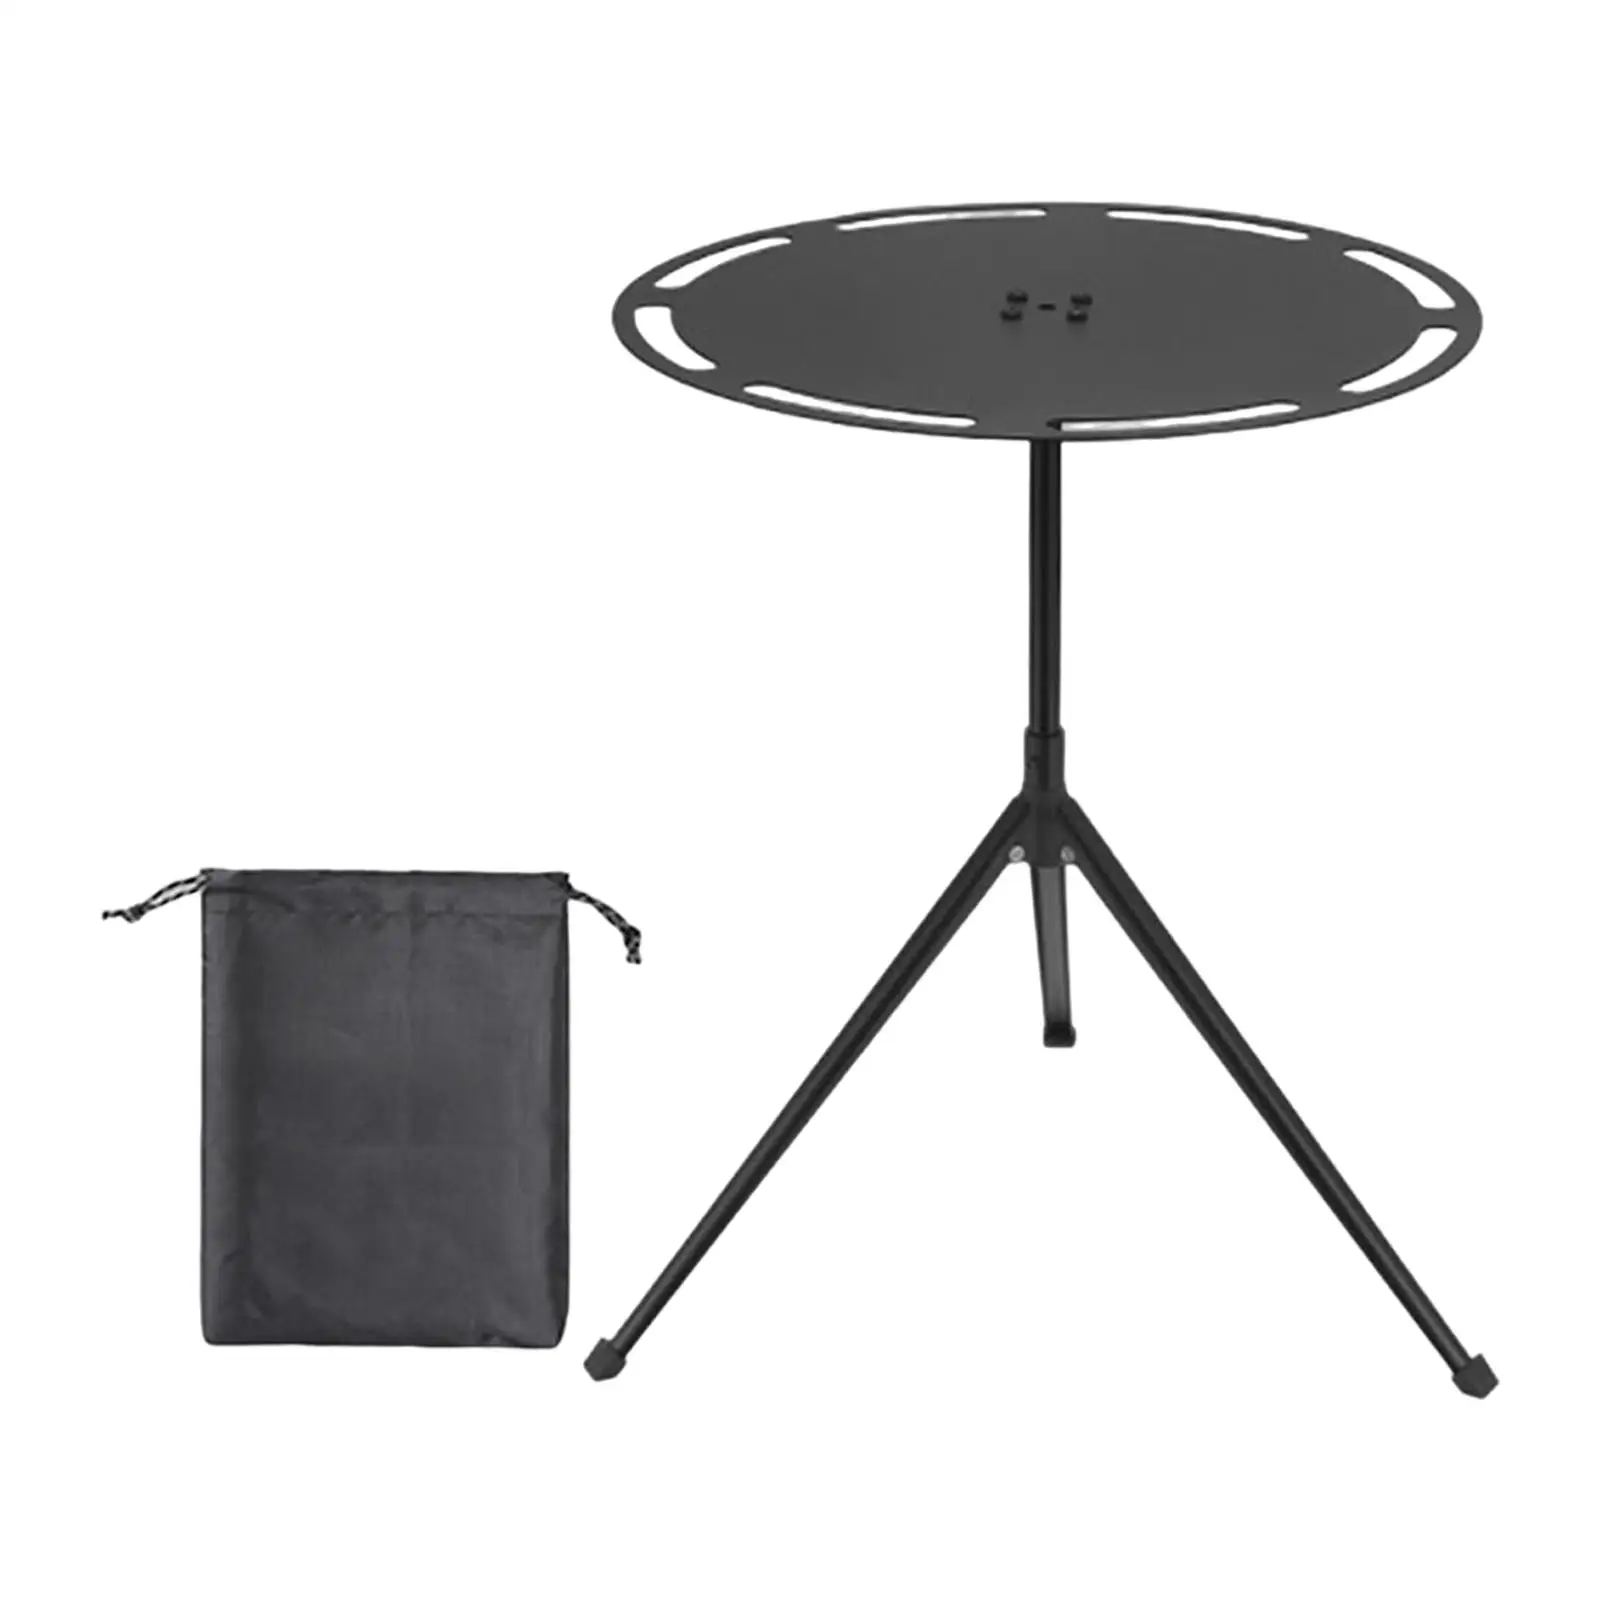 Camping Table Foldable Lightweight Travel Table Coffee Table Compact Furniture with Carrying Bag for Outdoor Hiking BBQ Travel